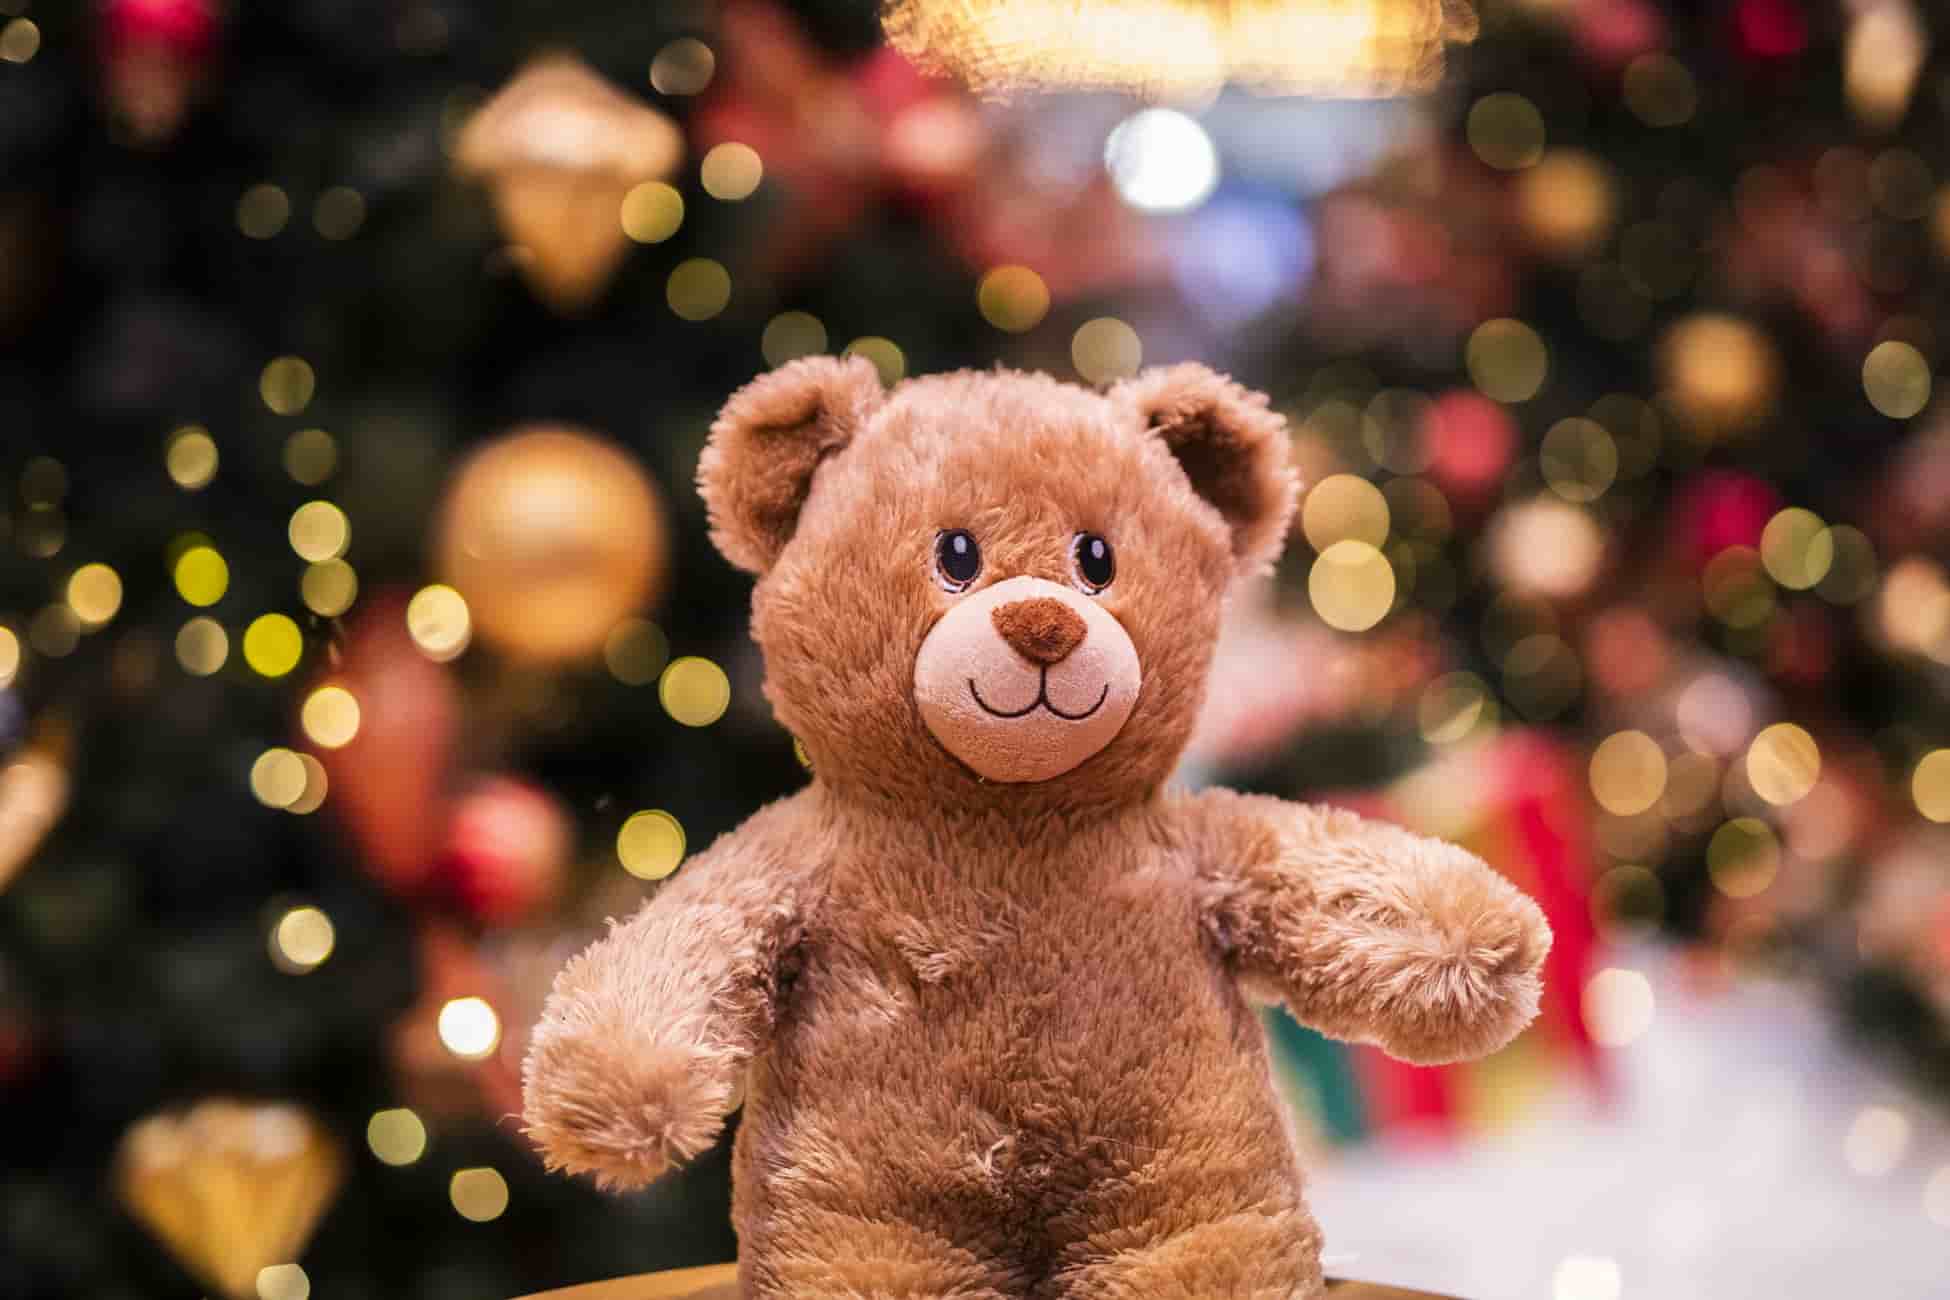 Most Beautiful Teddy Bear Image .121quotes.com